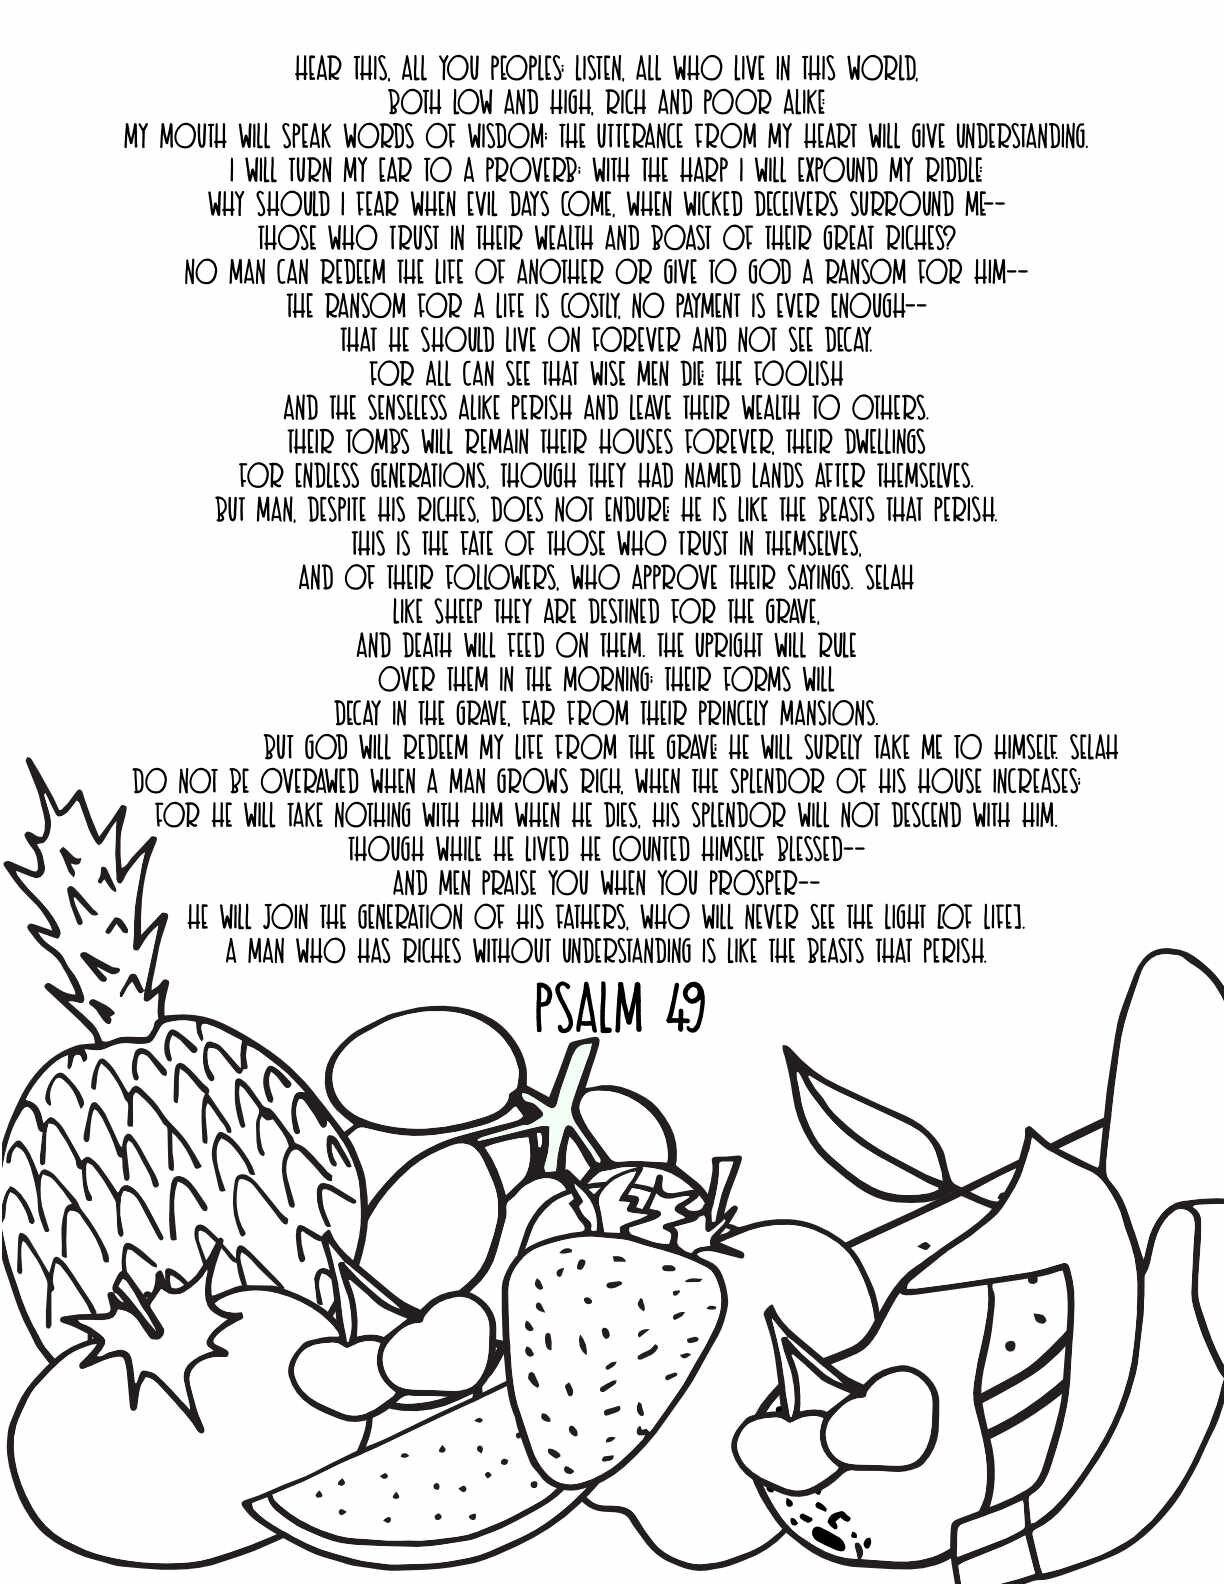 10 Free Printable Psalm Coloring Pages - Download and Color Adult Scripture - Psalm 49CLICK HERE TO DOWNLOAD THIS PAGE FREE